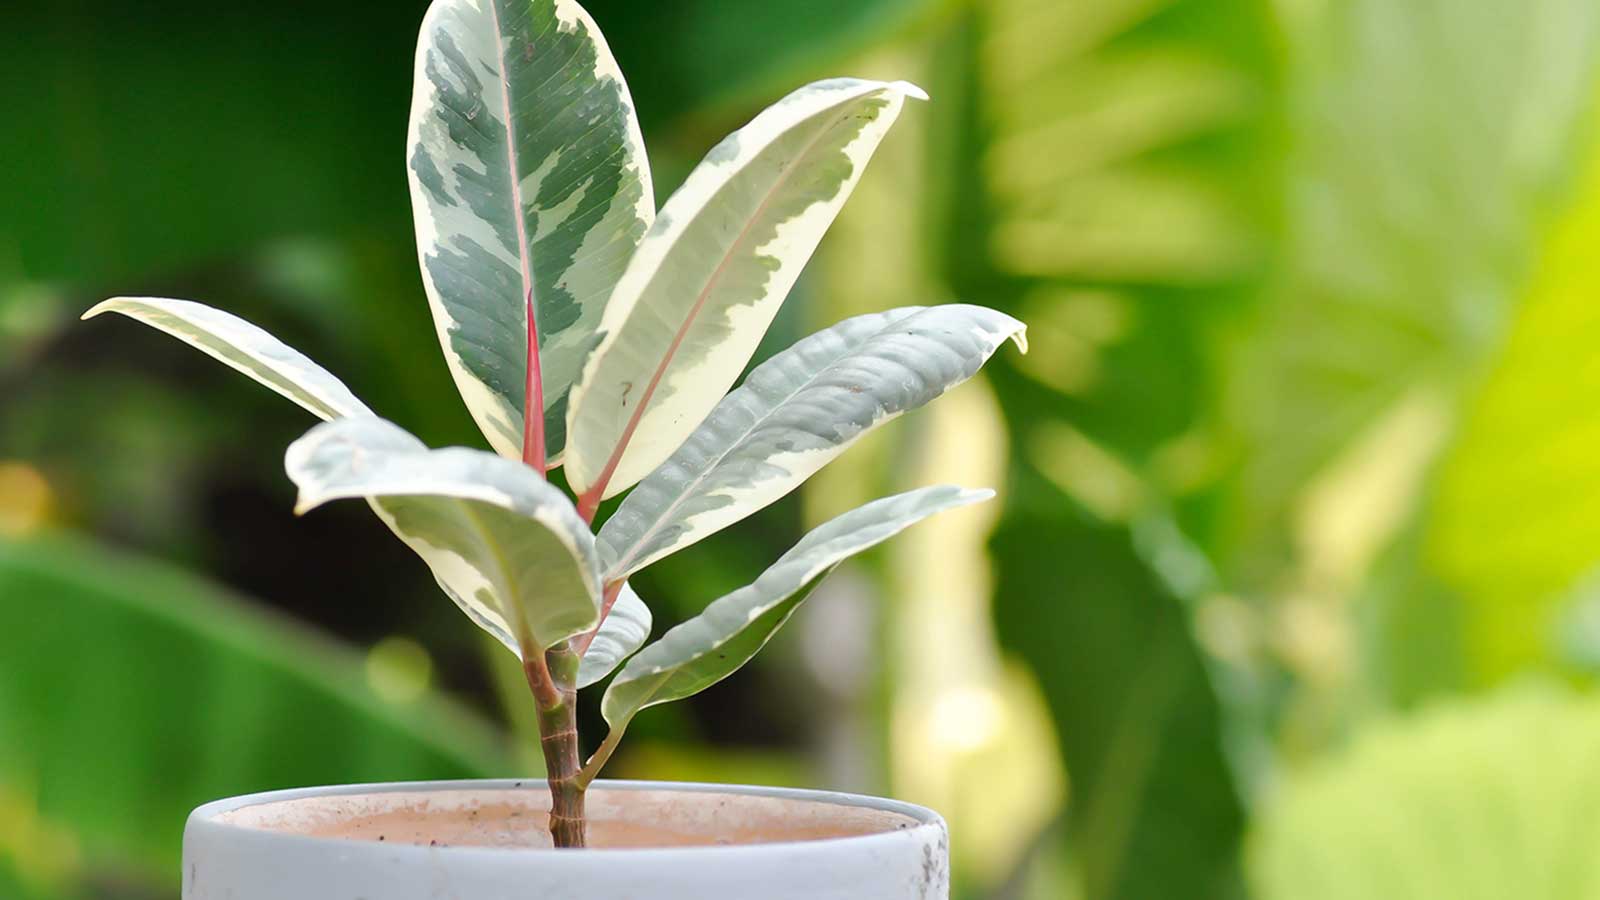 Starting Rubber Trees - How To Propagate A Rubber Tree Plant